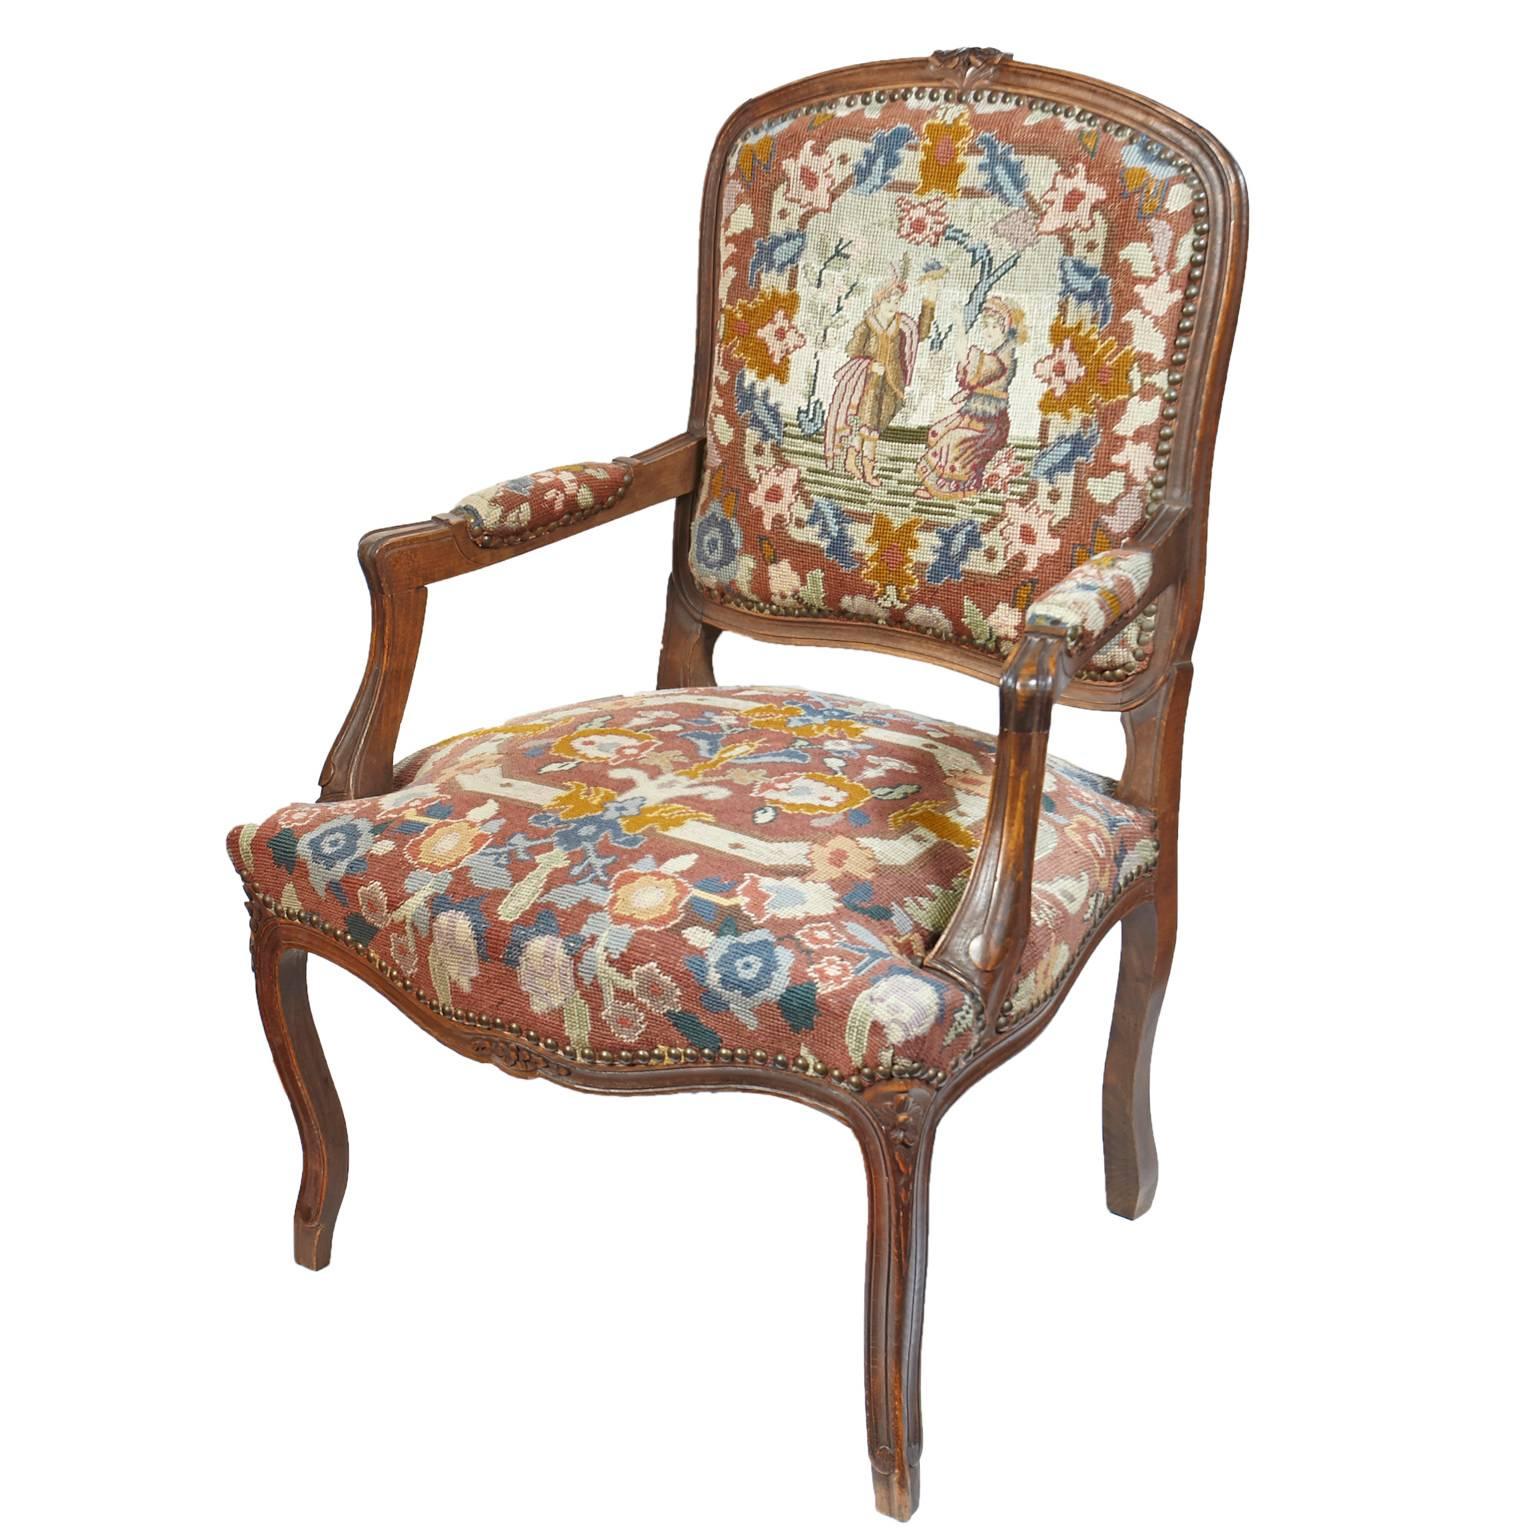 Beautiful Louis XVI style needle point chair.
Very good condition.